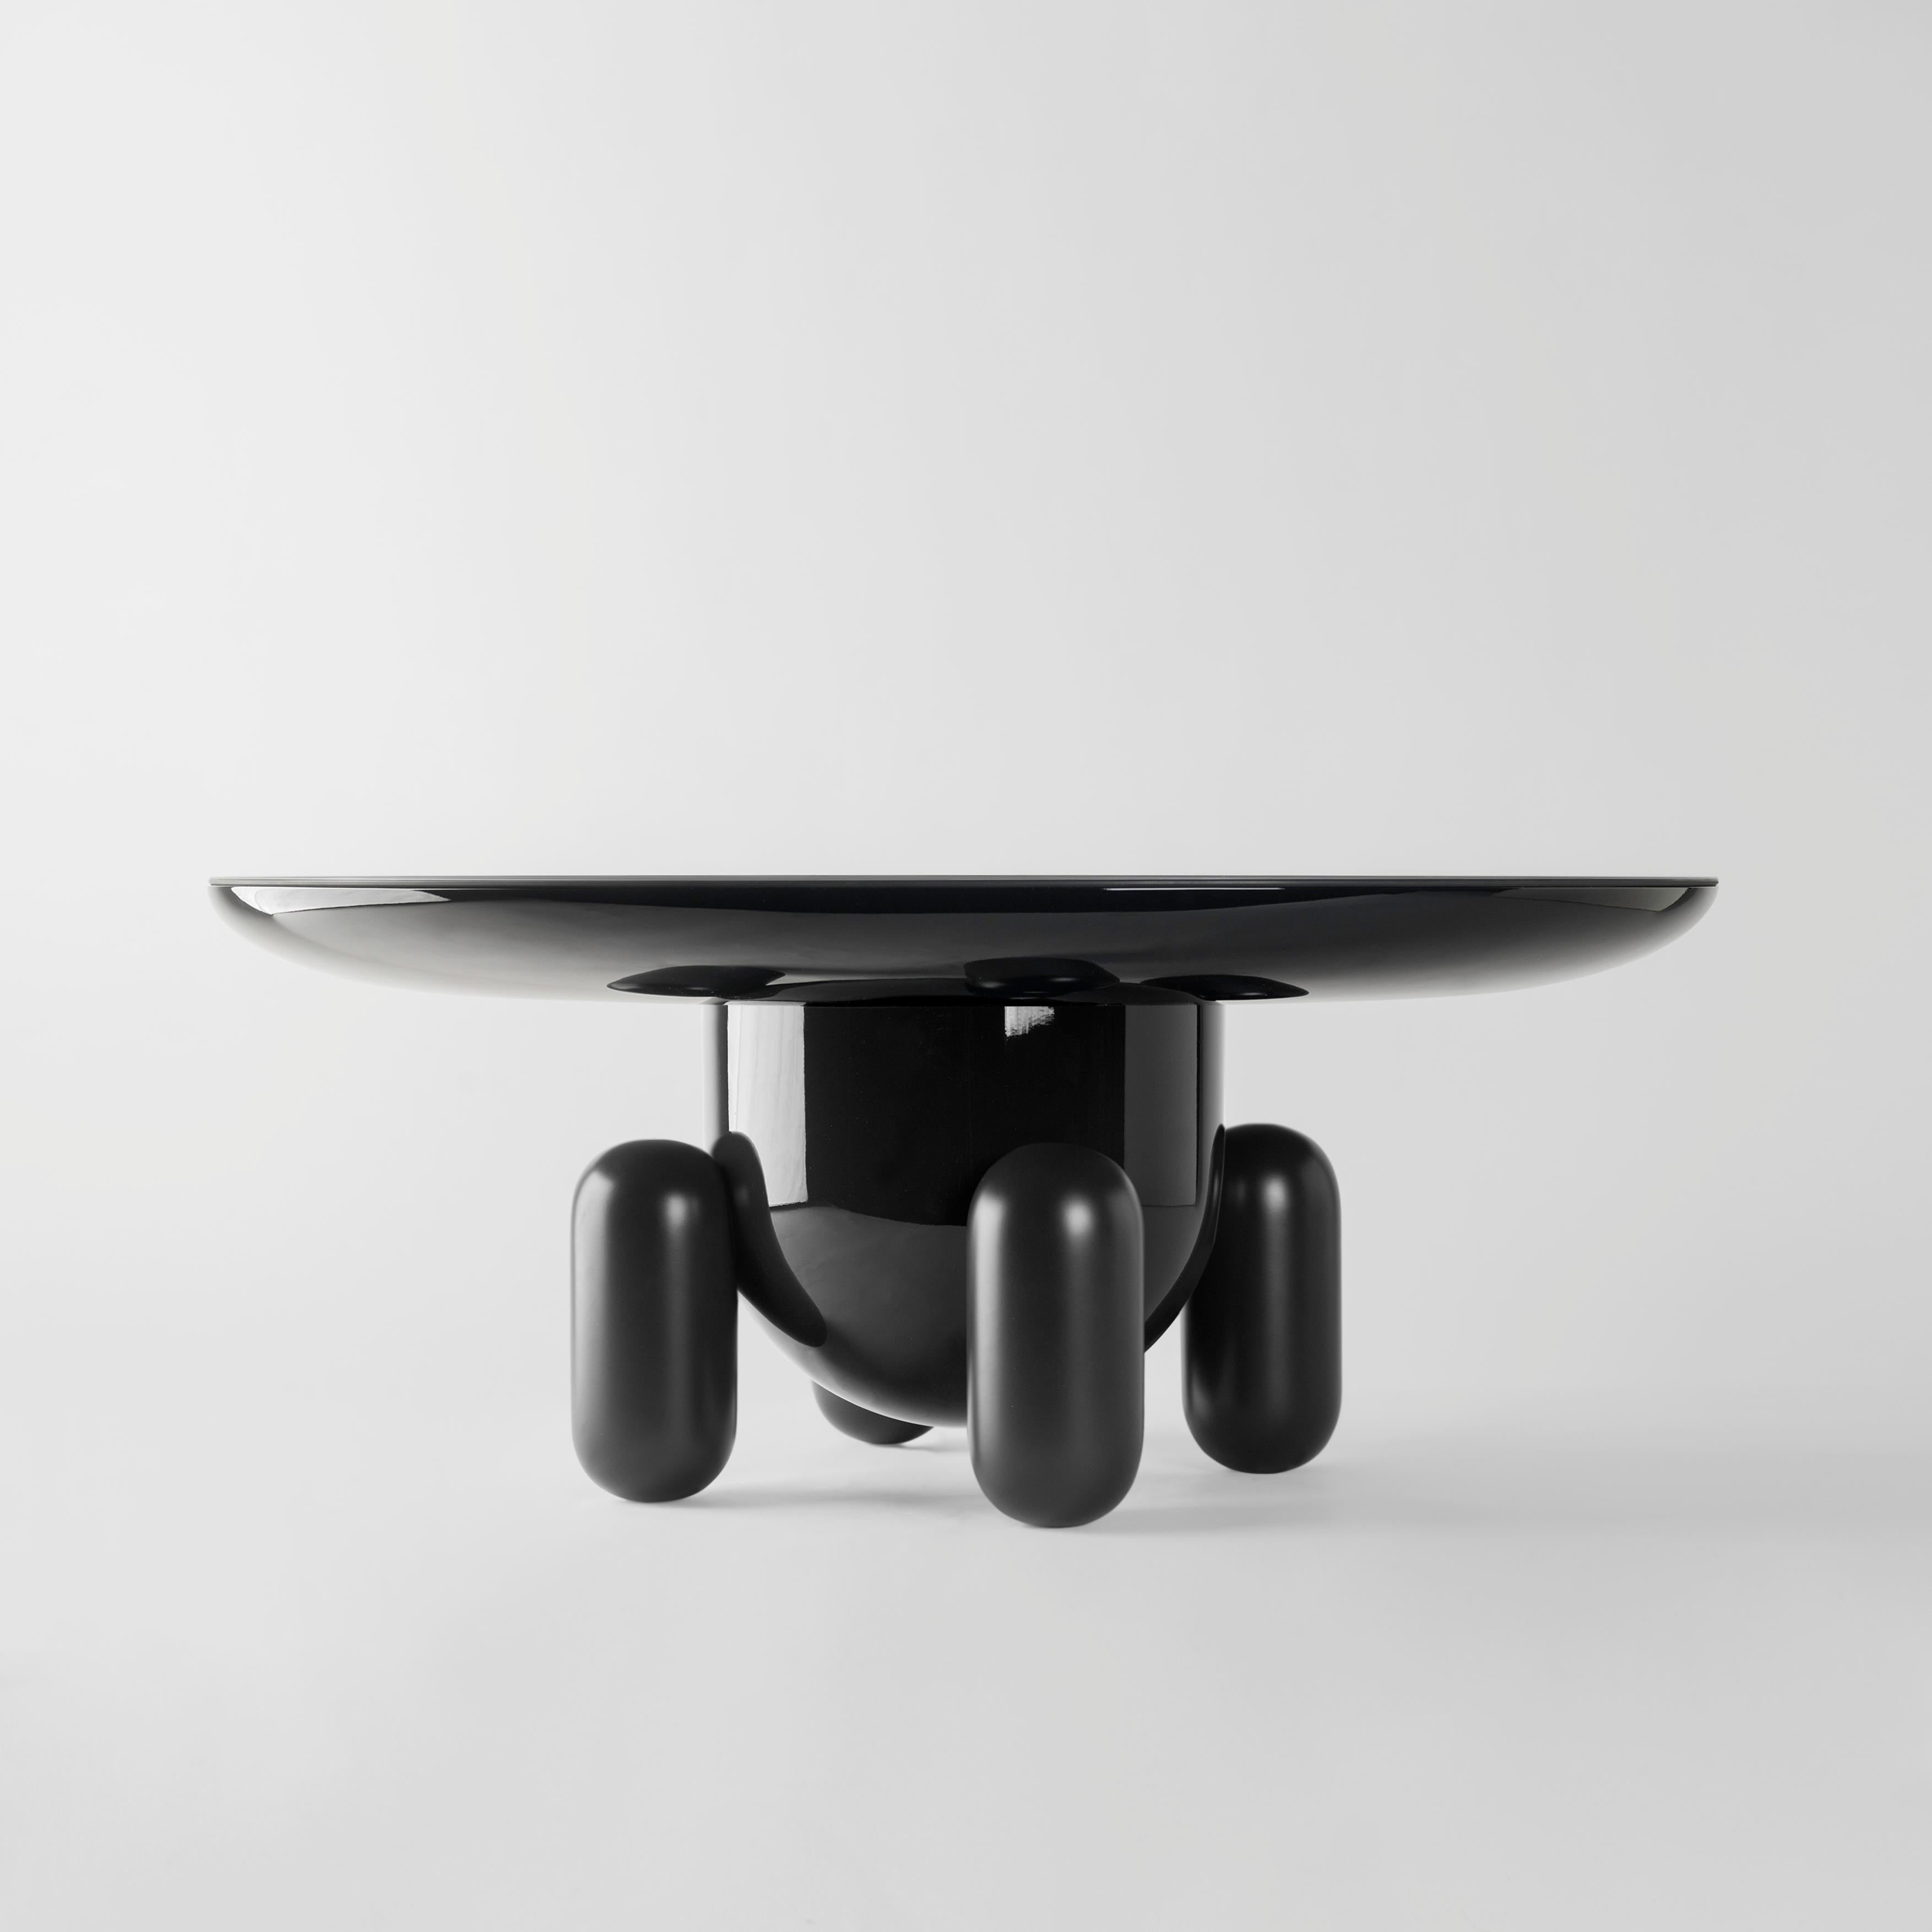 Dark grey explorer #03 table

Design by Jaime Hayon, 2019
Manufactured by BD Barcelona.

Laquered fibreglass body. Solid turned wooden legs and lacquered. Painted glass table top.

Measures: 100 Ø x 42 cm
40 Ø x 50 cm

- Glass RAL 7021
- Body RAL